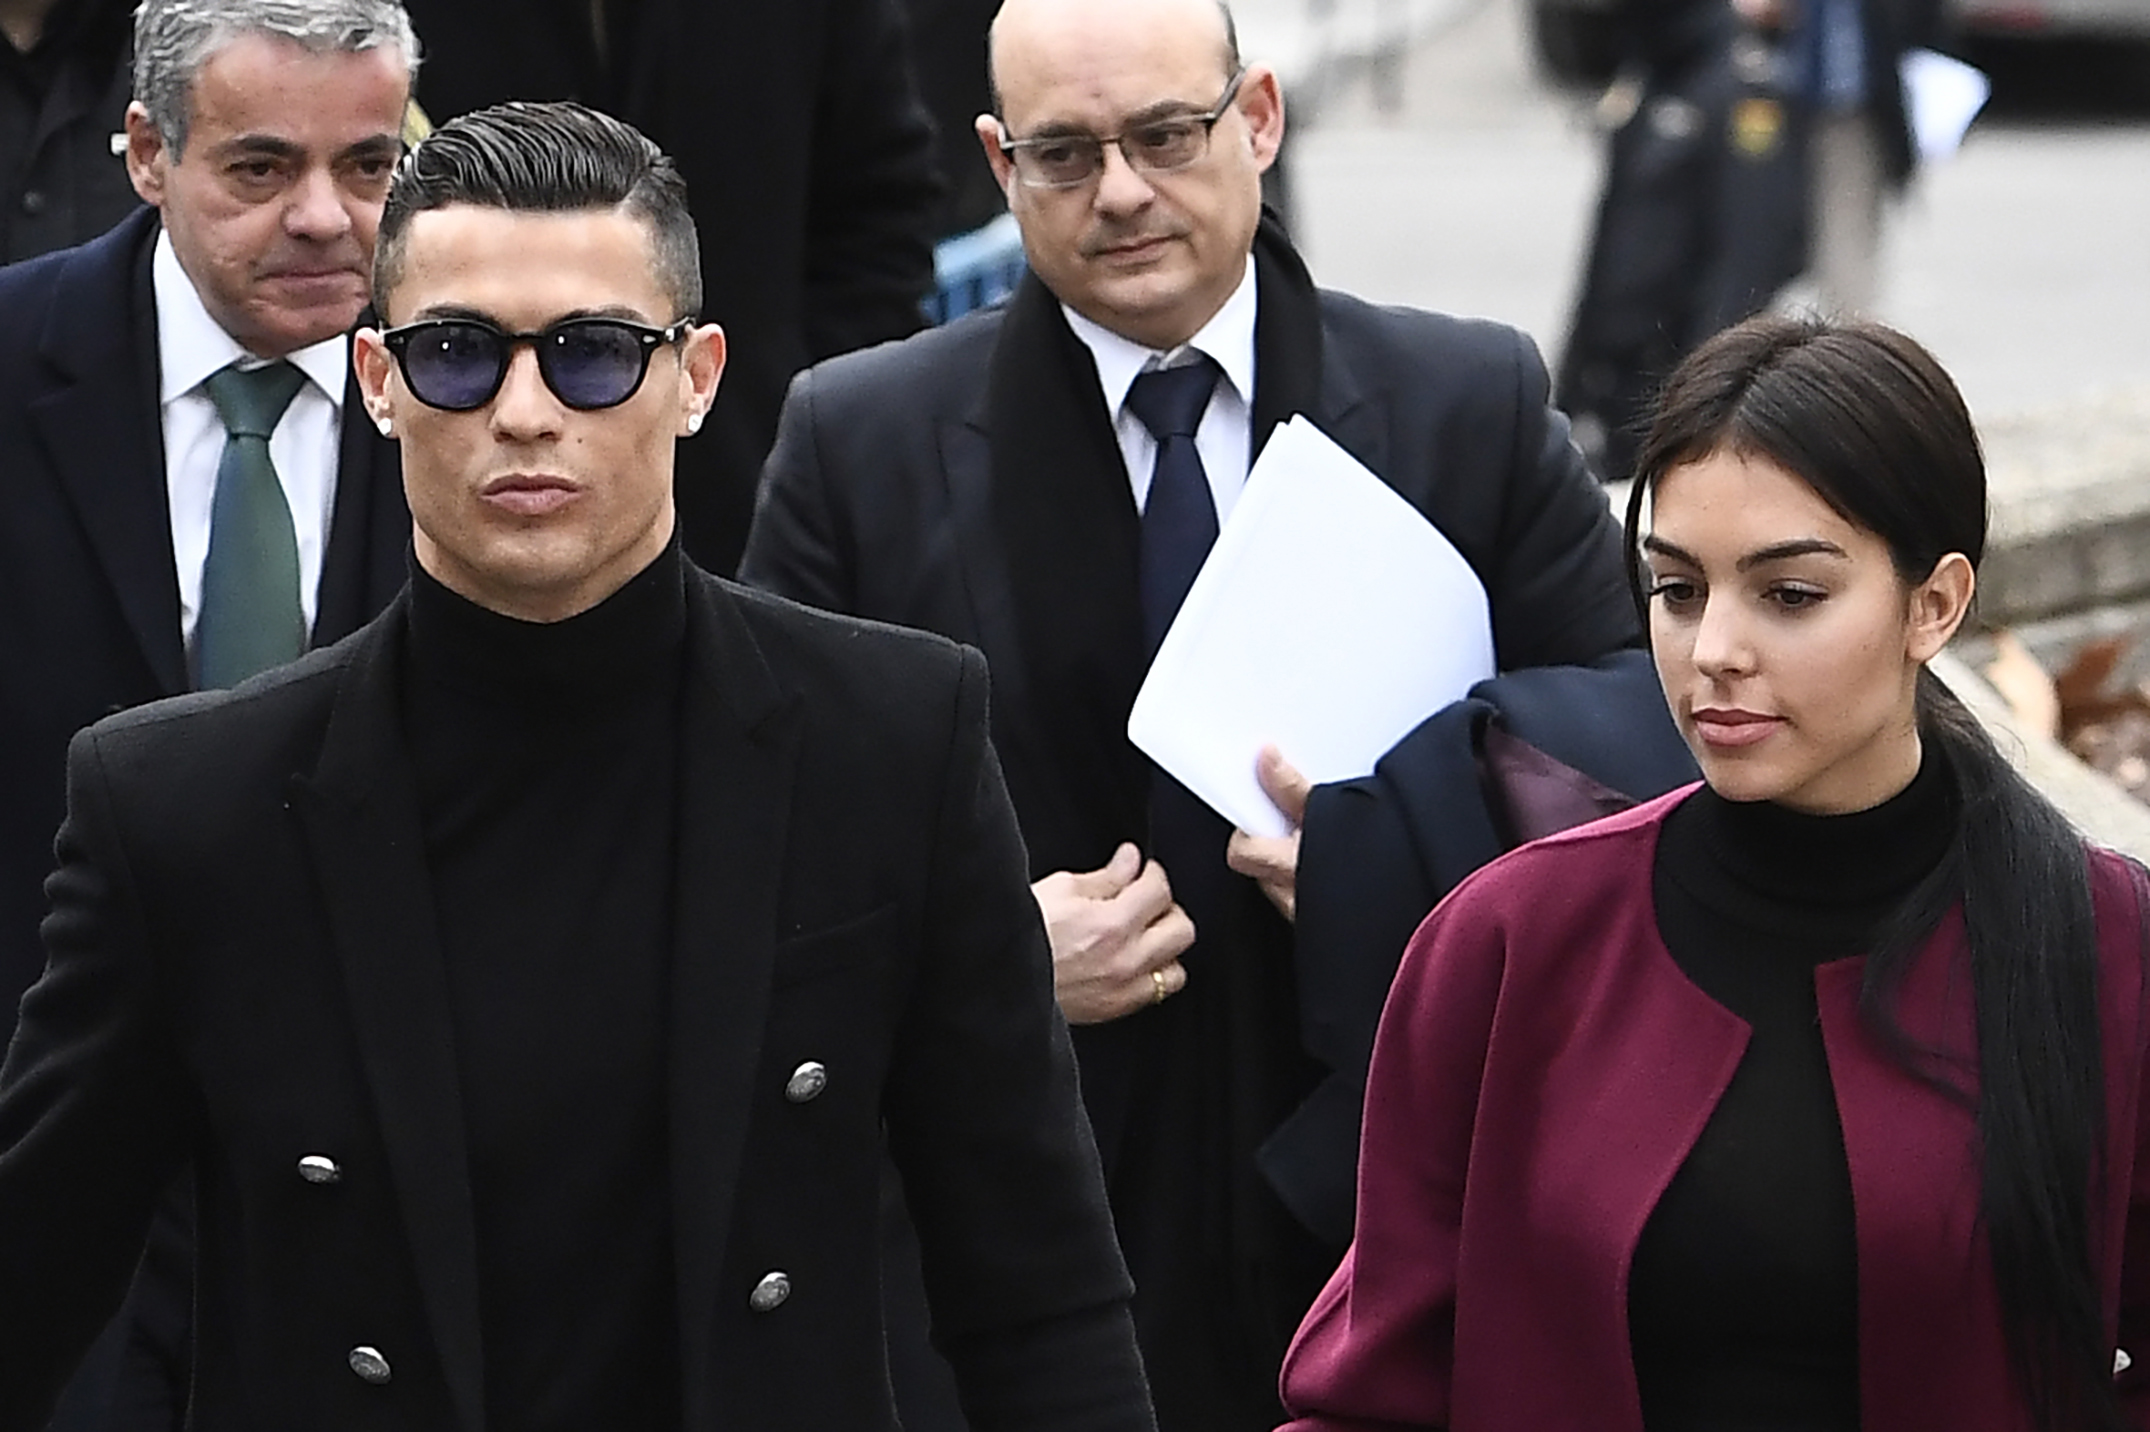 PHOTO: Juventus' forward and former Real Madrid player Cristiano Ronaldo arrives with his girlfriend Georgina Rodriguez to attend a court hearing for tax evasion in Madrid Jan. 22, 2019.